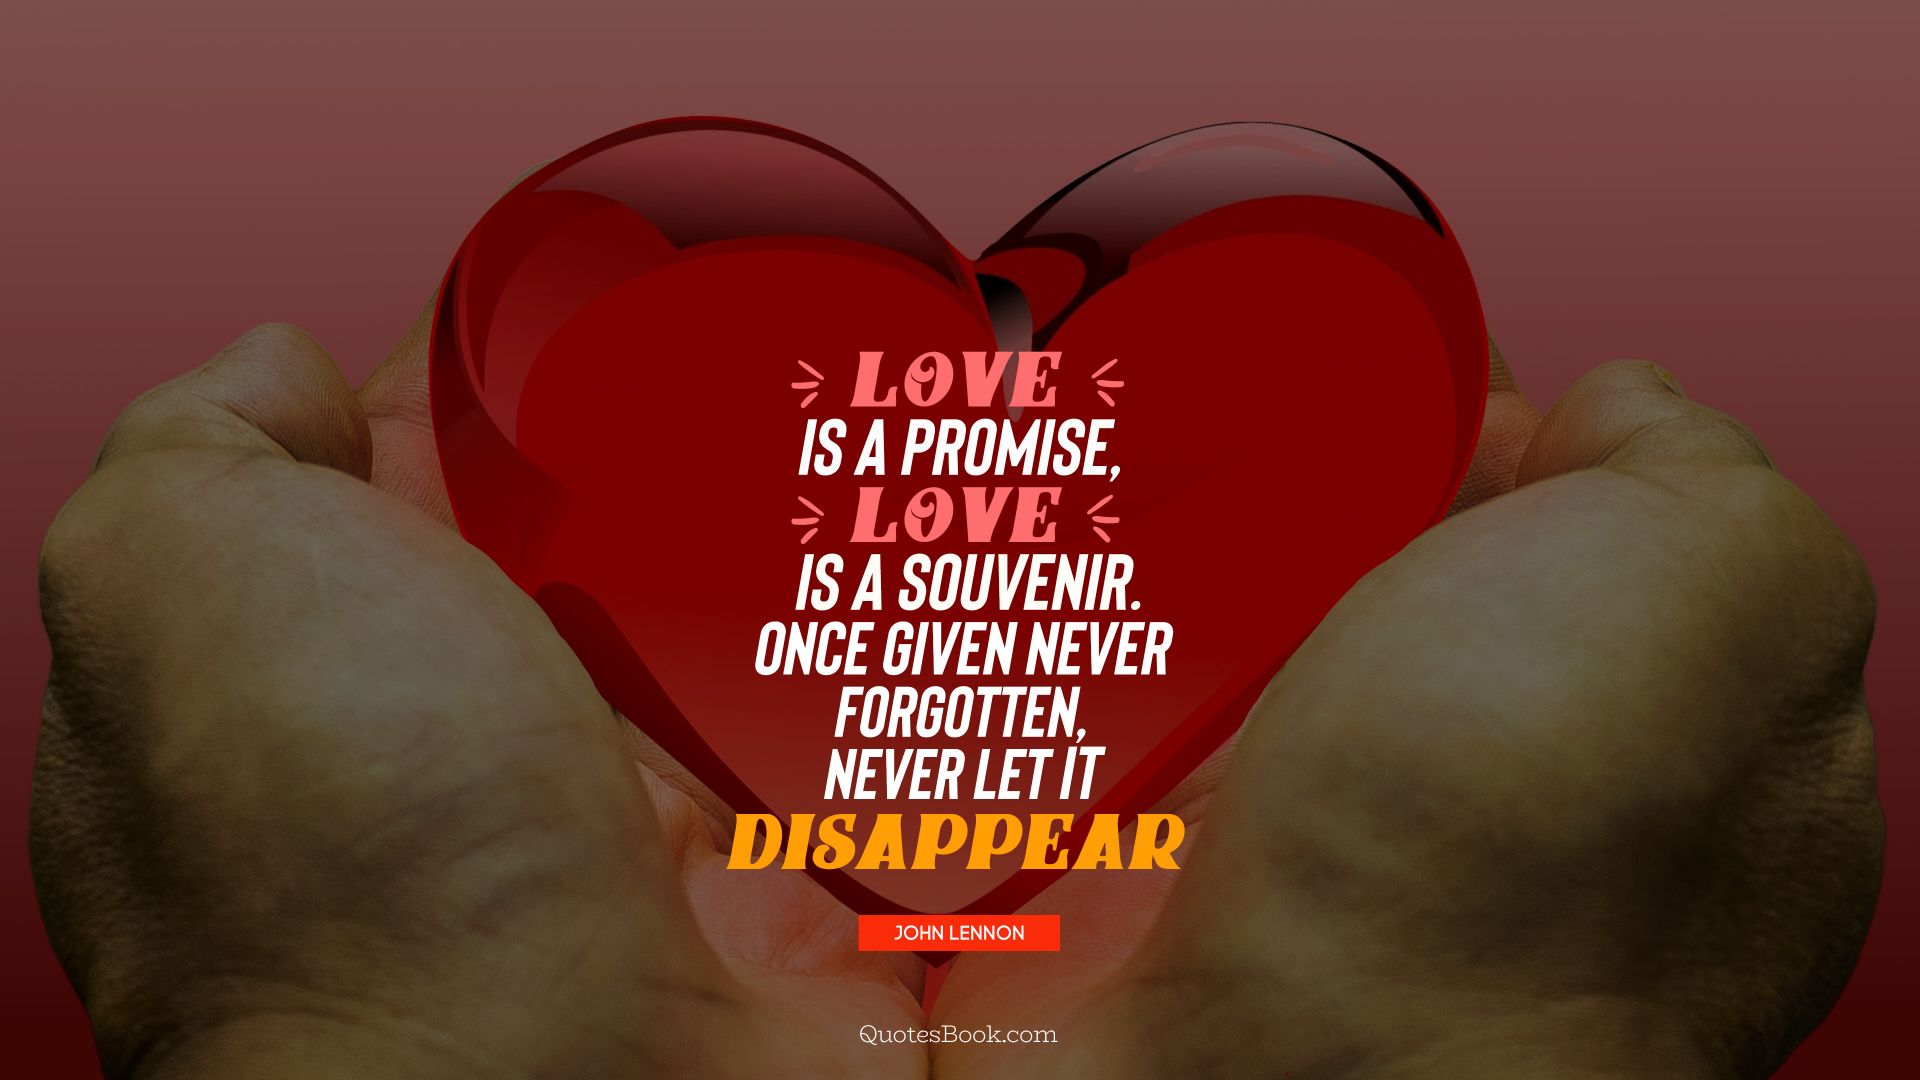 Love is a promise, love is a souvenir. Once given never forgotten,never let it disappear. - Quote by John Lennon